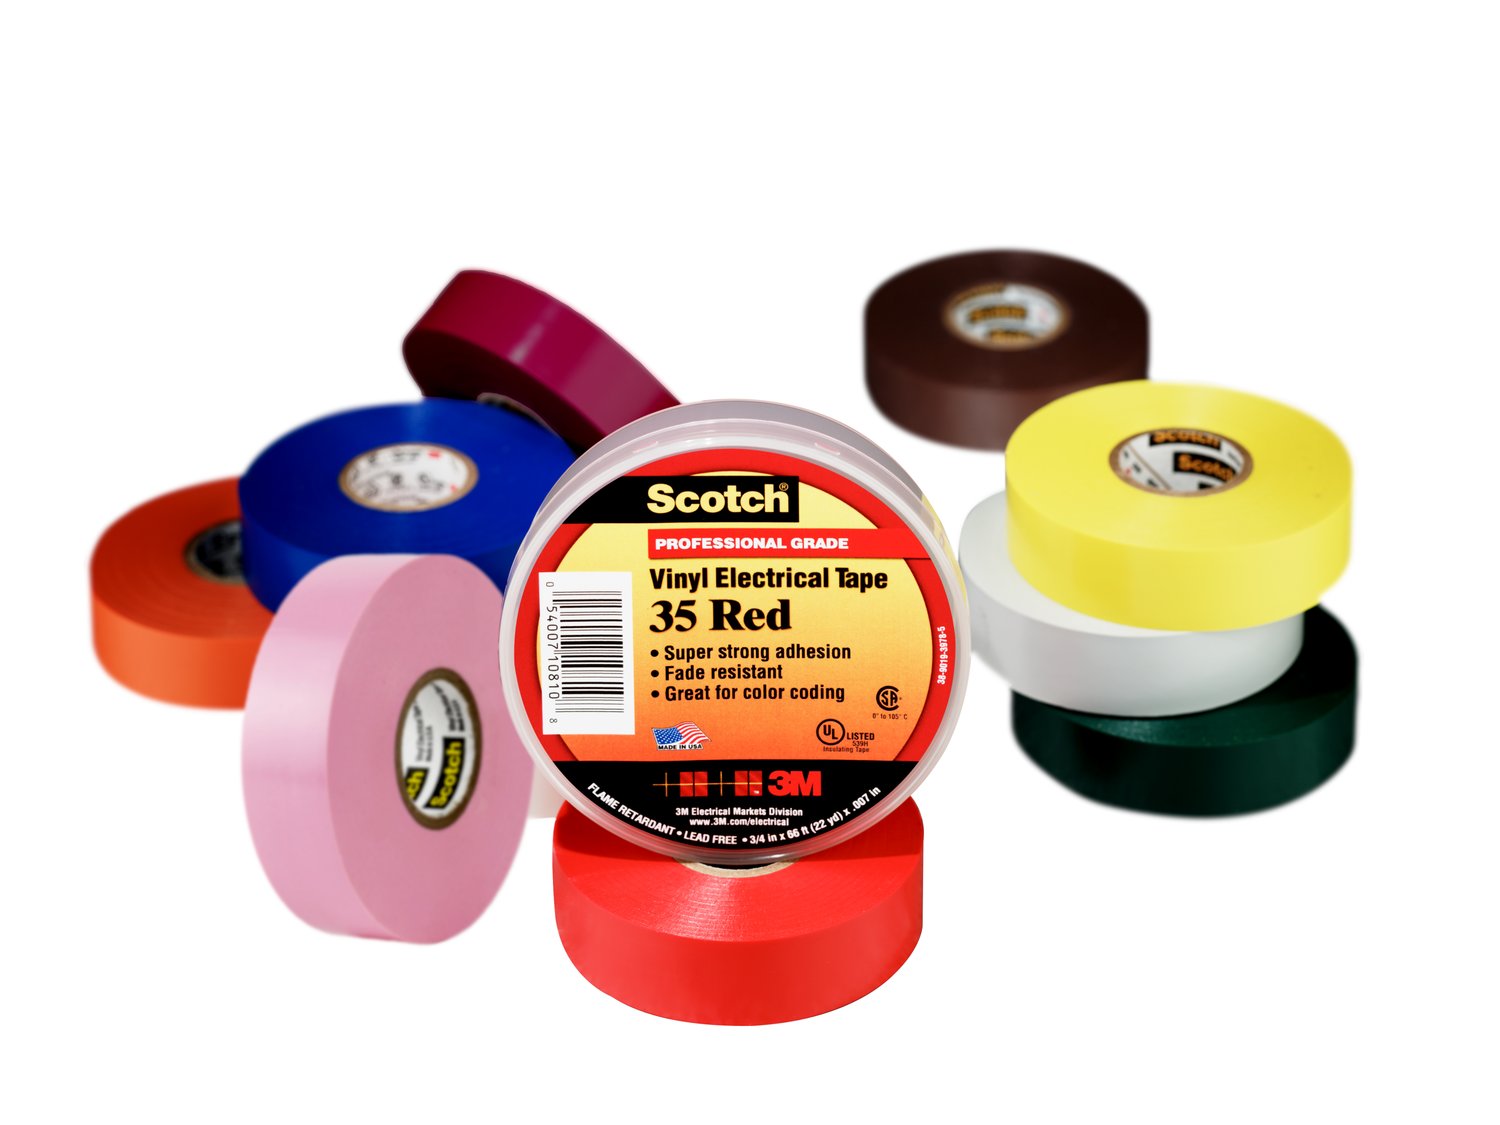 7010297490 - Scotch Vinyl Color Coding Electrical Tape 35, 1/2 in x 20 ft,
Multi-color, 8 rolls/pack, 50 packs/Case